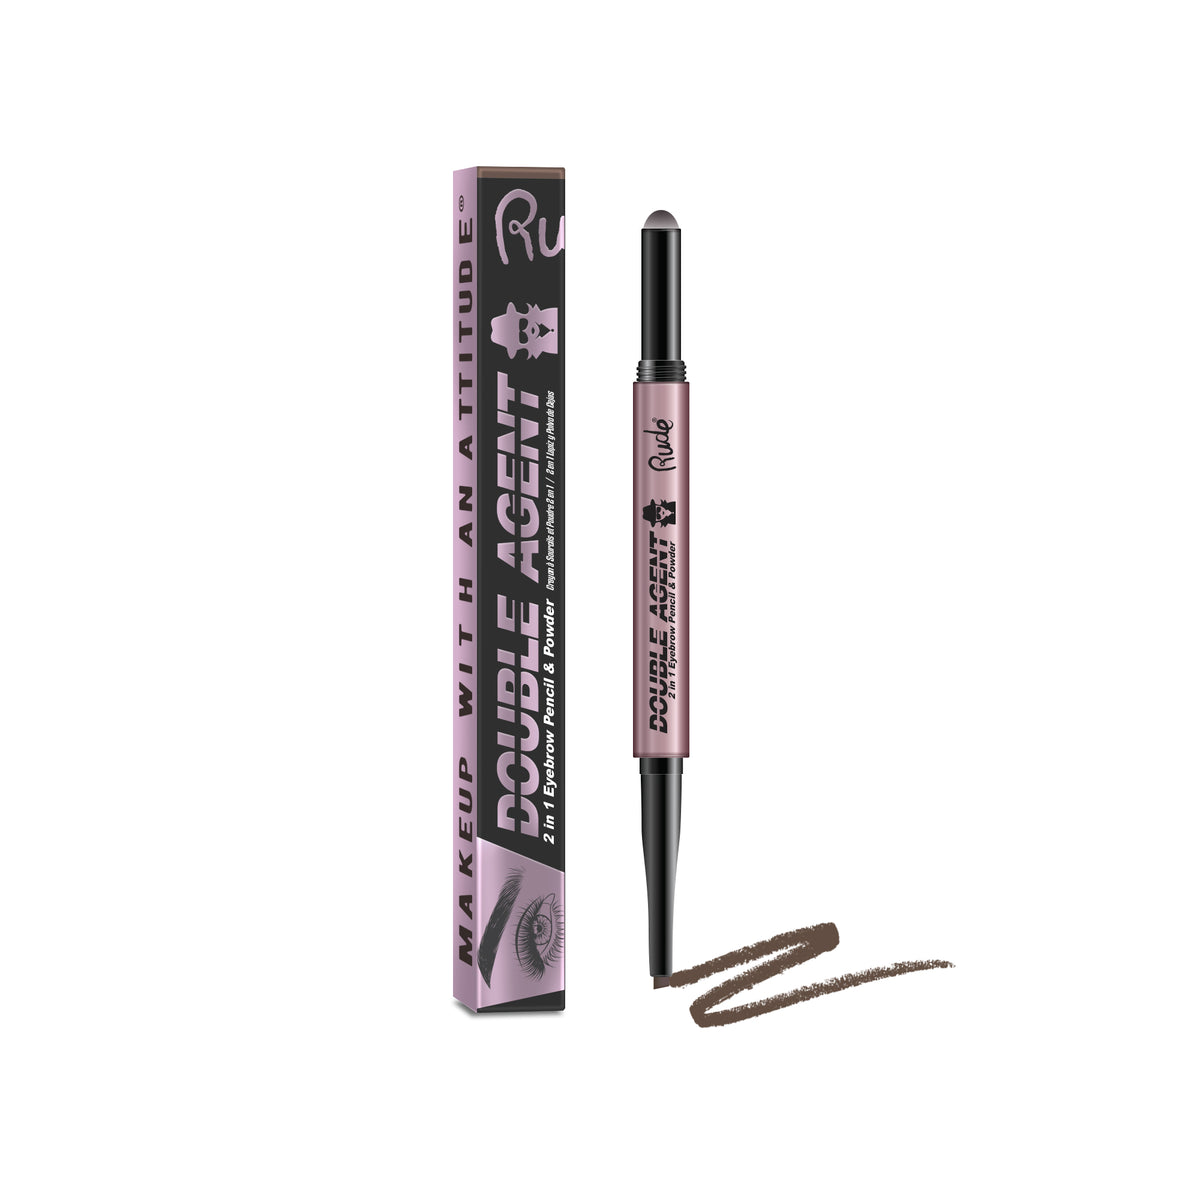 Double Agent 2 in 1 Eyebrow Pencil and Powder